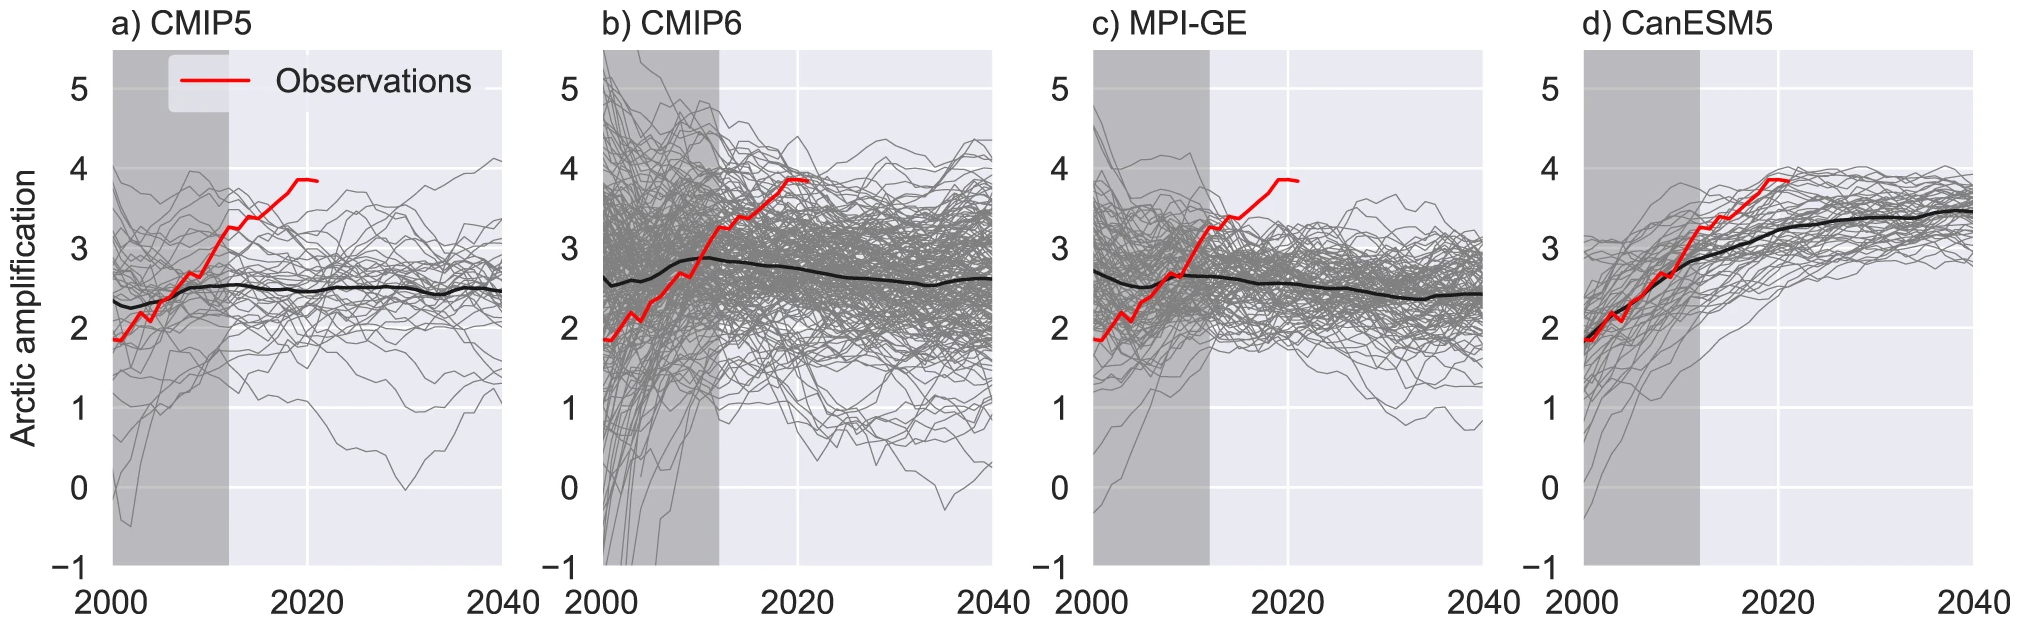 The 43-year Arctic amplification (AA) ratio derived from (a) CMIP5, (b) CMIP6, (c) MPI-GE and (d) CanESM5 realizations (thin grey lines) for all 43-year periods ending in 2000–2040. The x-axis represents the ending year of the 43-year AA ratios. Thick black lines represents the ensemble mean AA, calculated as a mean of ratios, not ratio of means. Observations (red lines) extend to 2021. 43-year AA ratios starting after 1970 and ending by 2040 are considered in the probability calculations (Section “Likelihood of observed Arctic amplification 1979–2021 in climate model simulations”) and shown with light background. The Arctic is defined as the area north of 66.5∘N. Graphic: Rantanen, et al., 2022 / Communications Earth and Environment